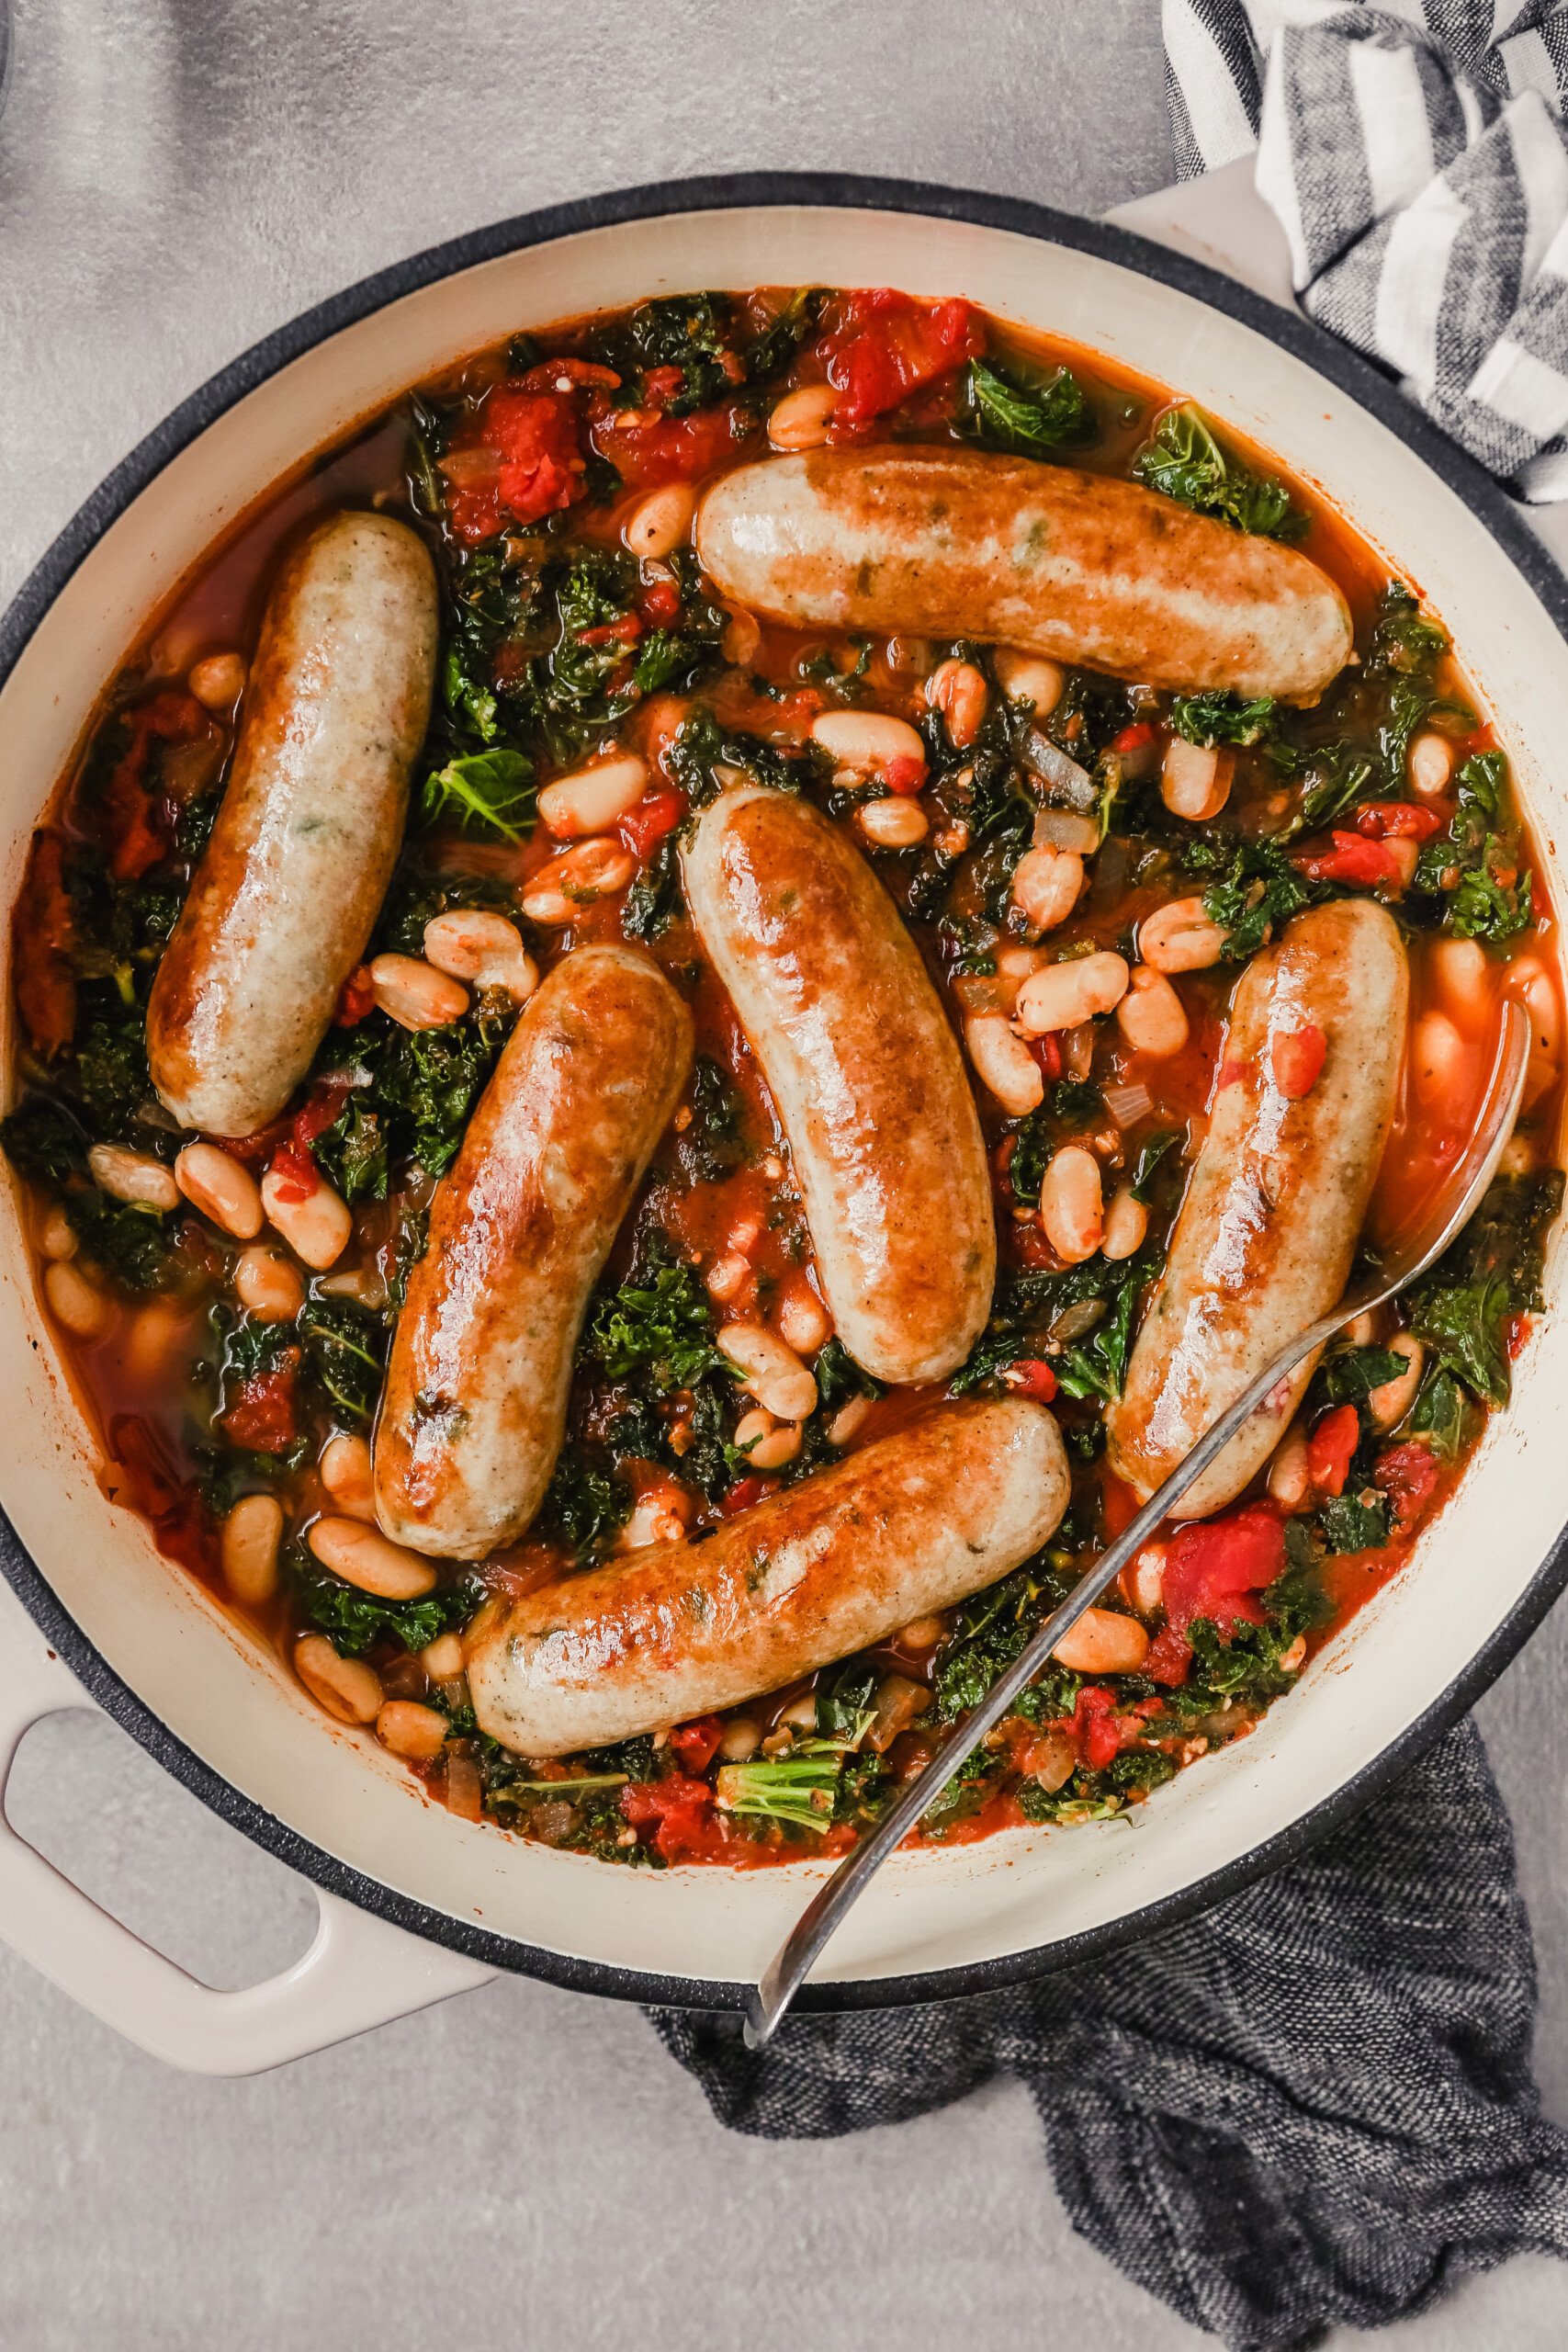 Overhead photograph of a Dutch oven filled with Italian chicken sausages stewed in tomatoes, kale and white beans 